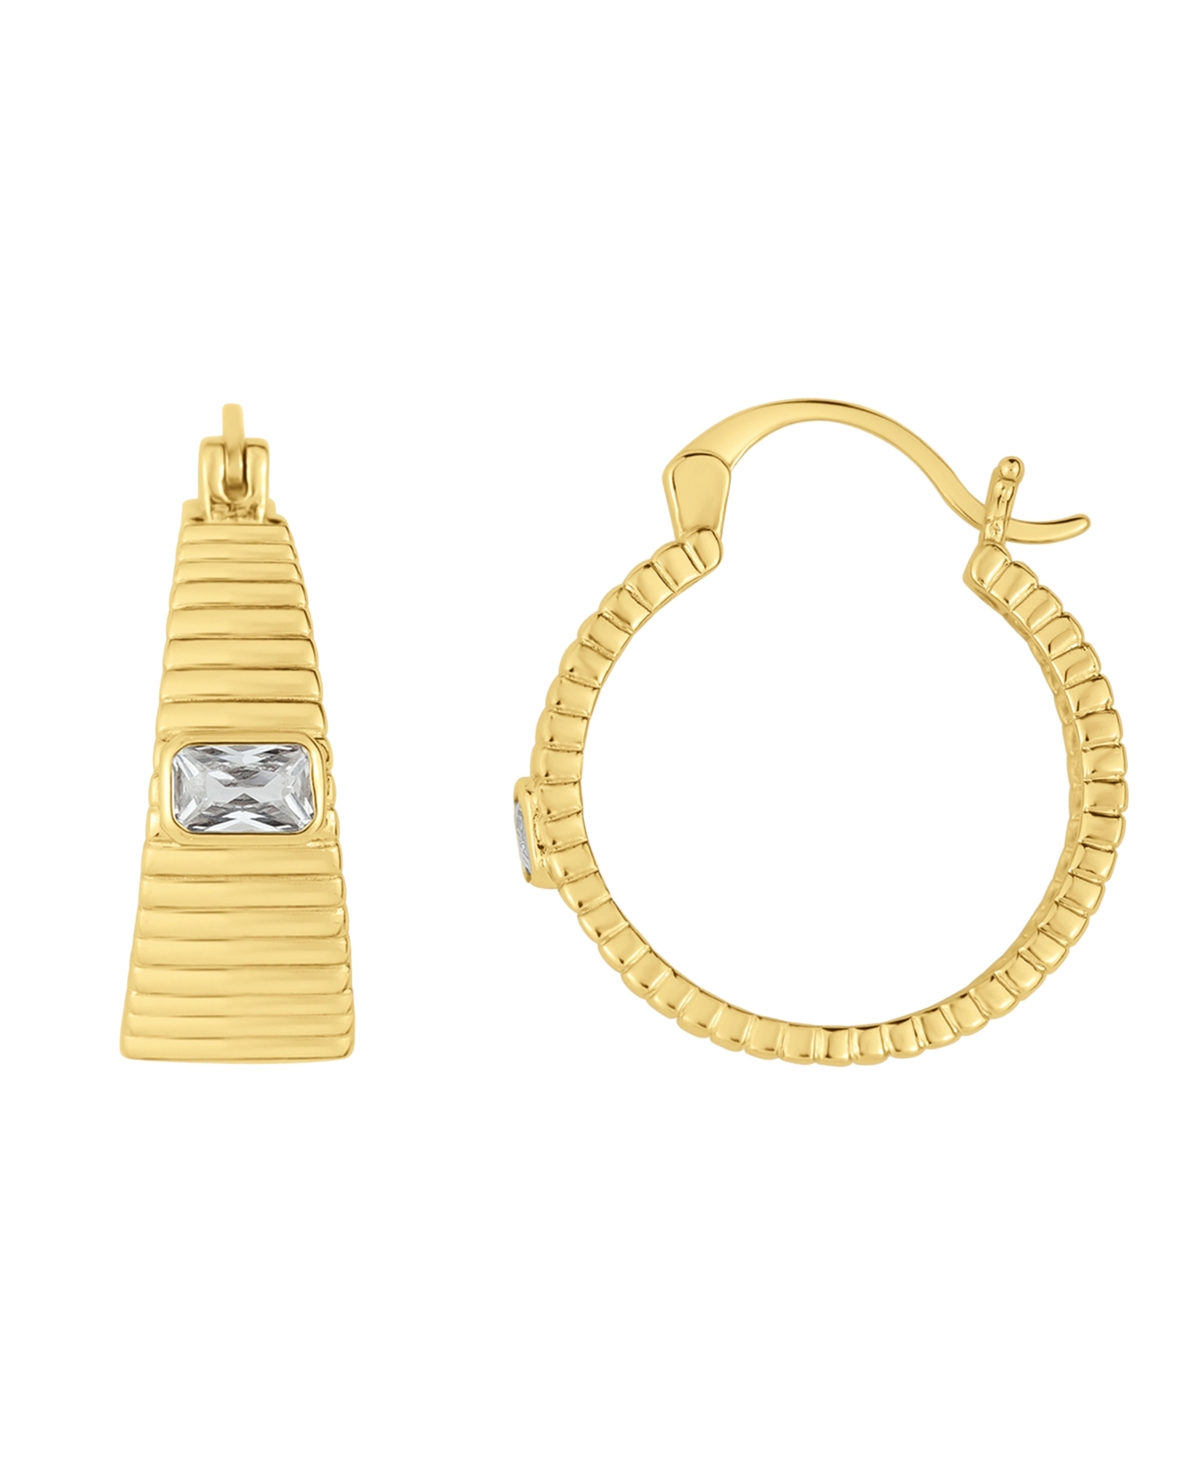 And Now This Cubic Zirconia 18k Gold Plated Ribbed Texture Hoop Earring In K Gold Plated Over Brass